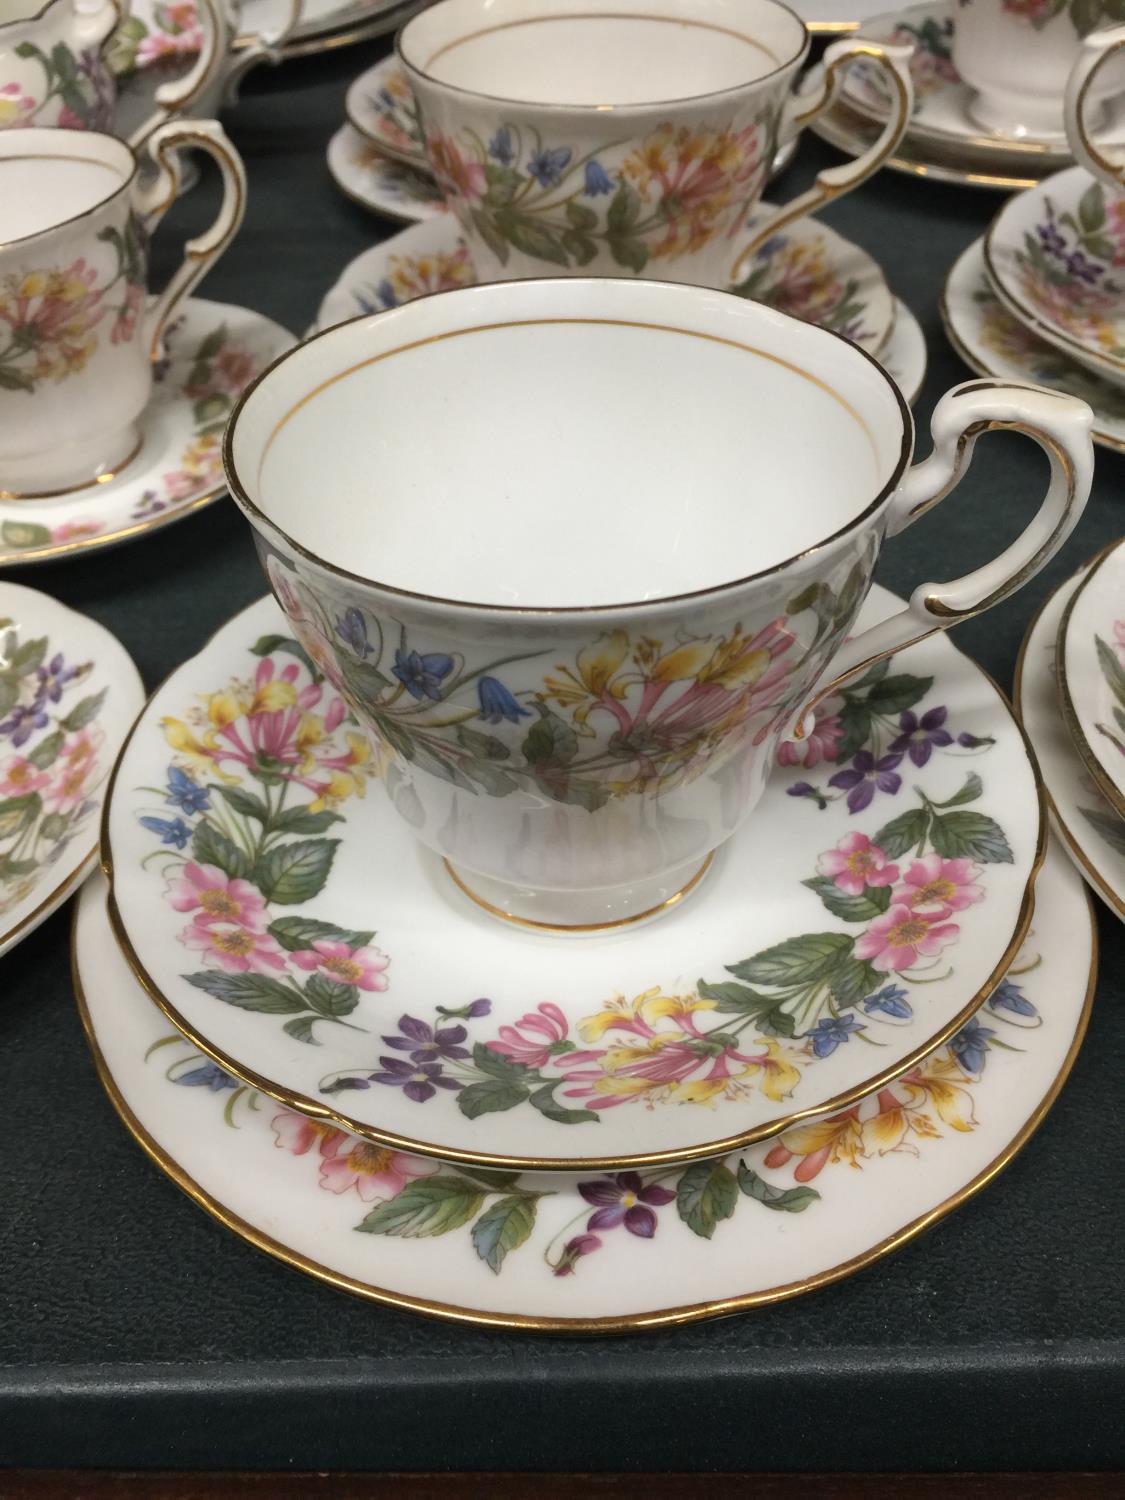 A LARGE QUANTITY OF PARAGON 'COUNTRY LANE' TEAWARE TO INCLUDE CUPS, SAUCERS, CAKE PLATE, CAKE STAND, - Image 4 of 6